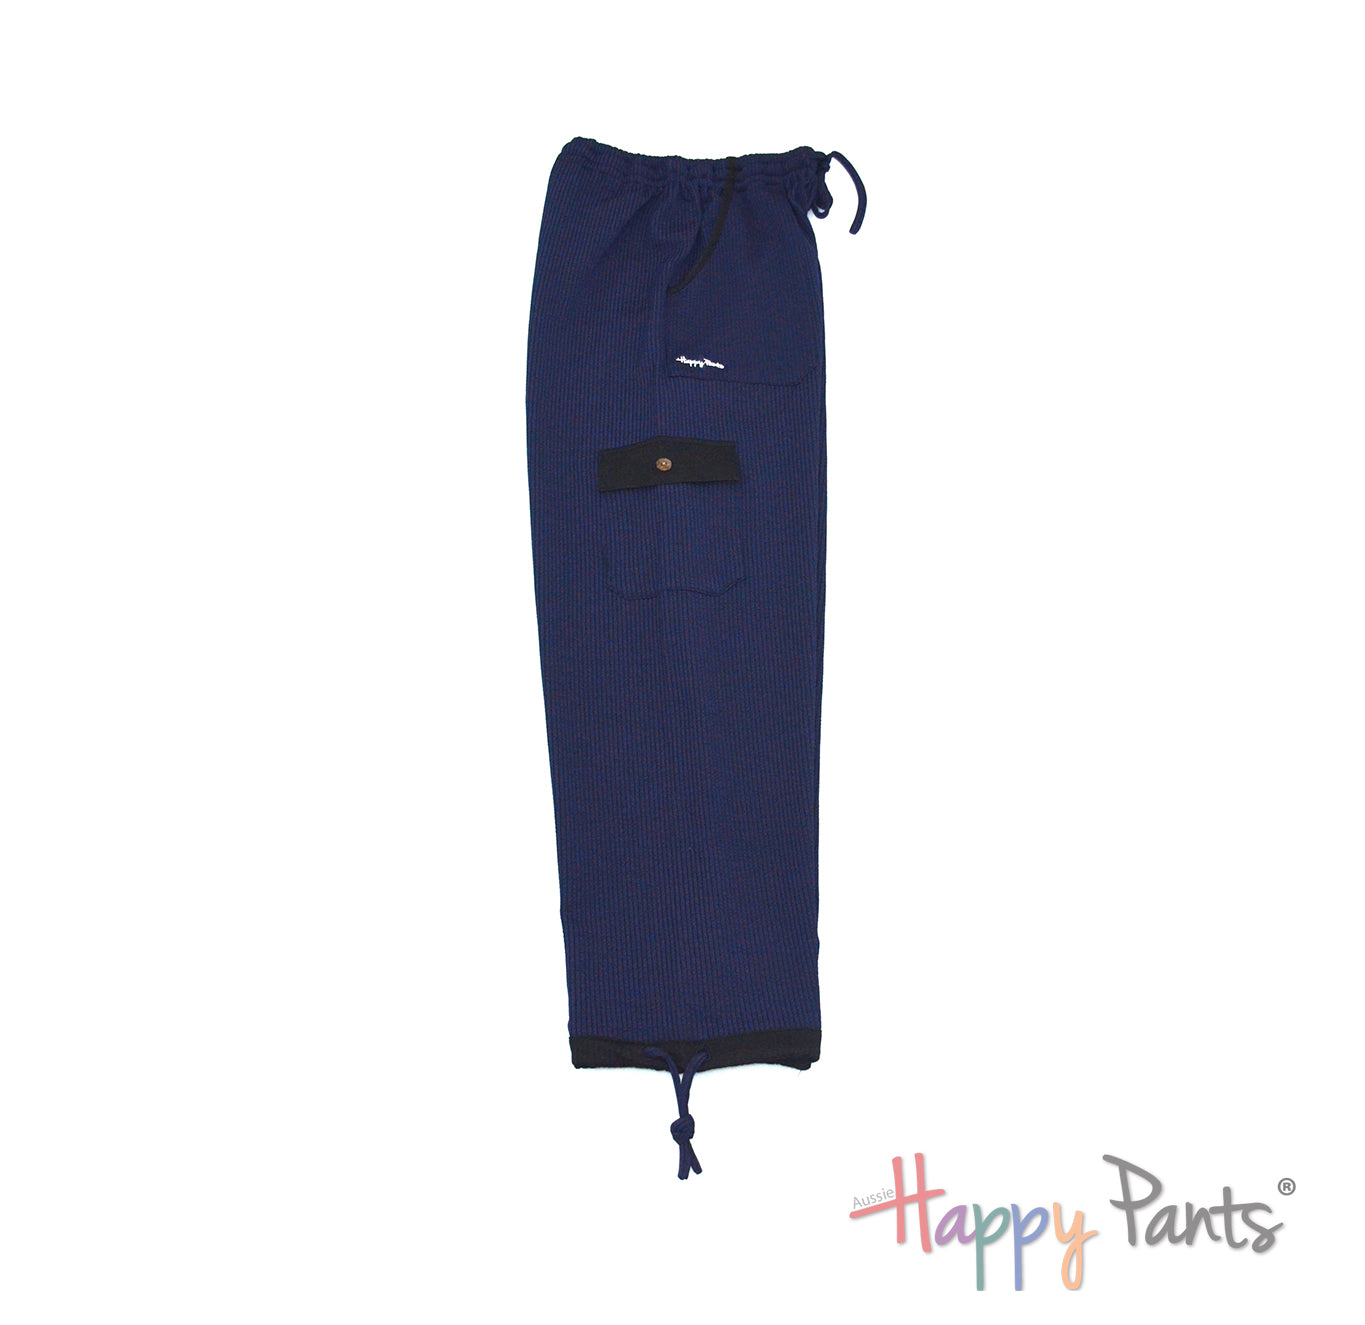 Navy blue pinstripe Trousers for Men with elastic waist holiday pants resort wear Australia comfy cotton joggers